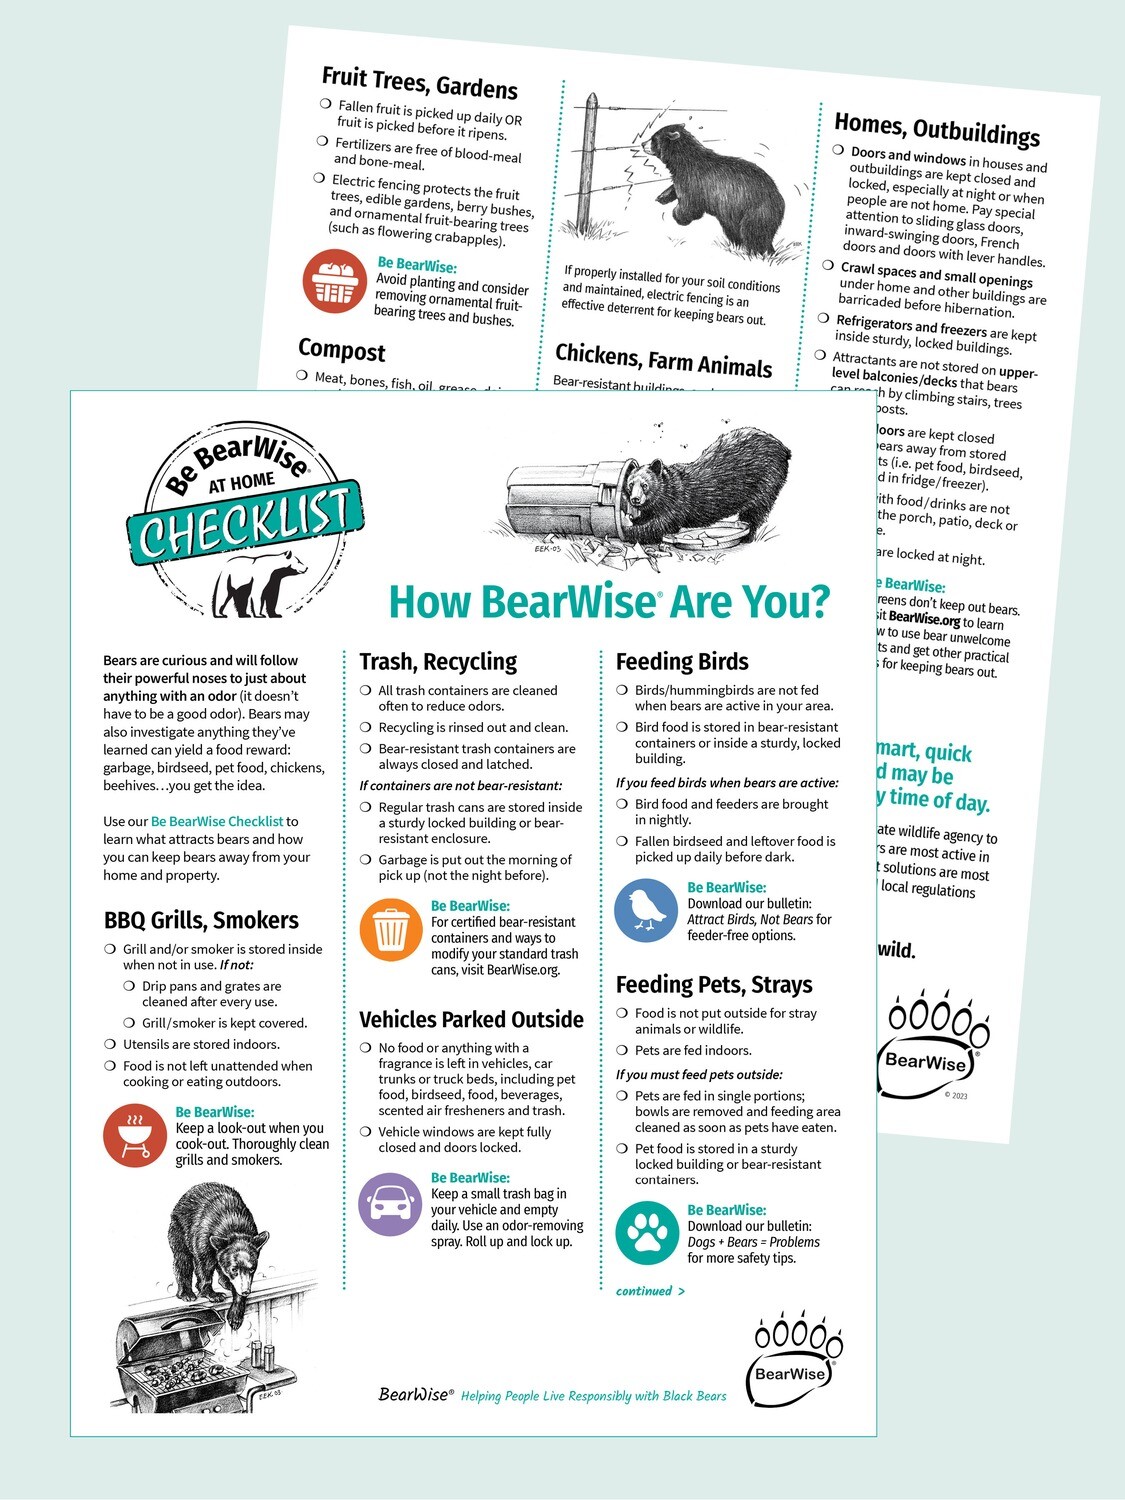 How BearWise Are You? CHECKLIST